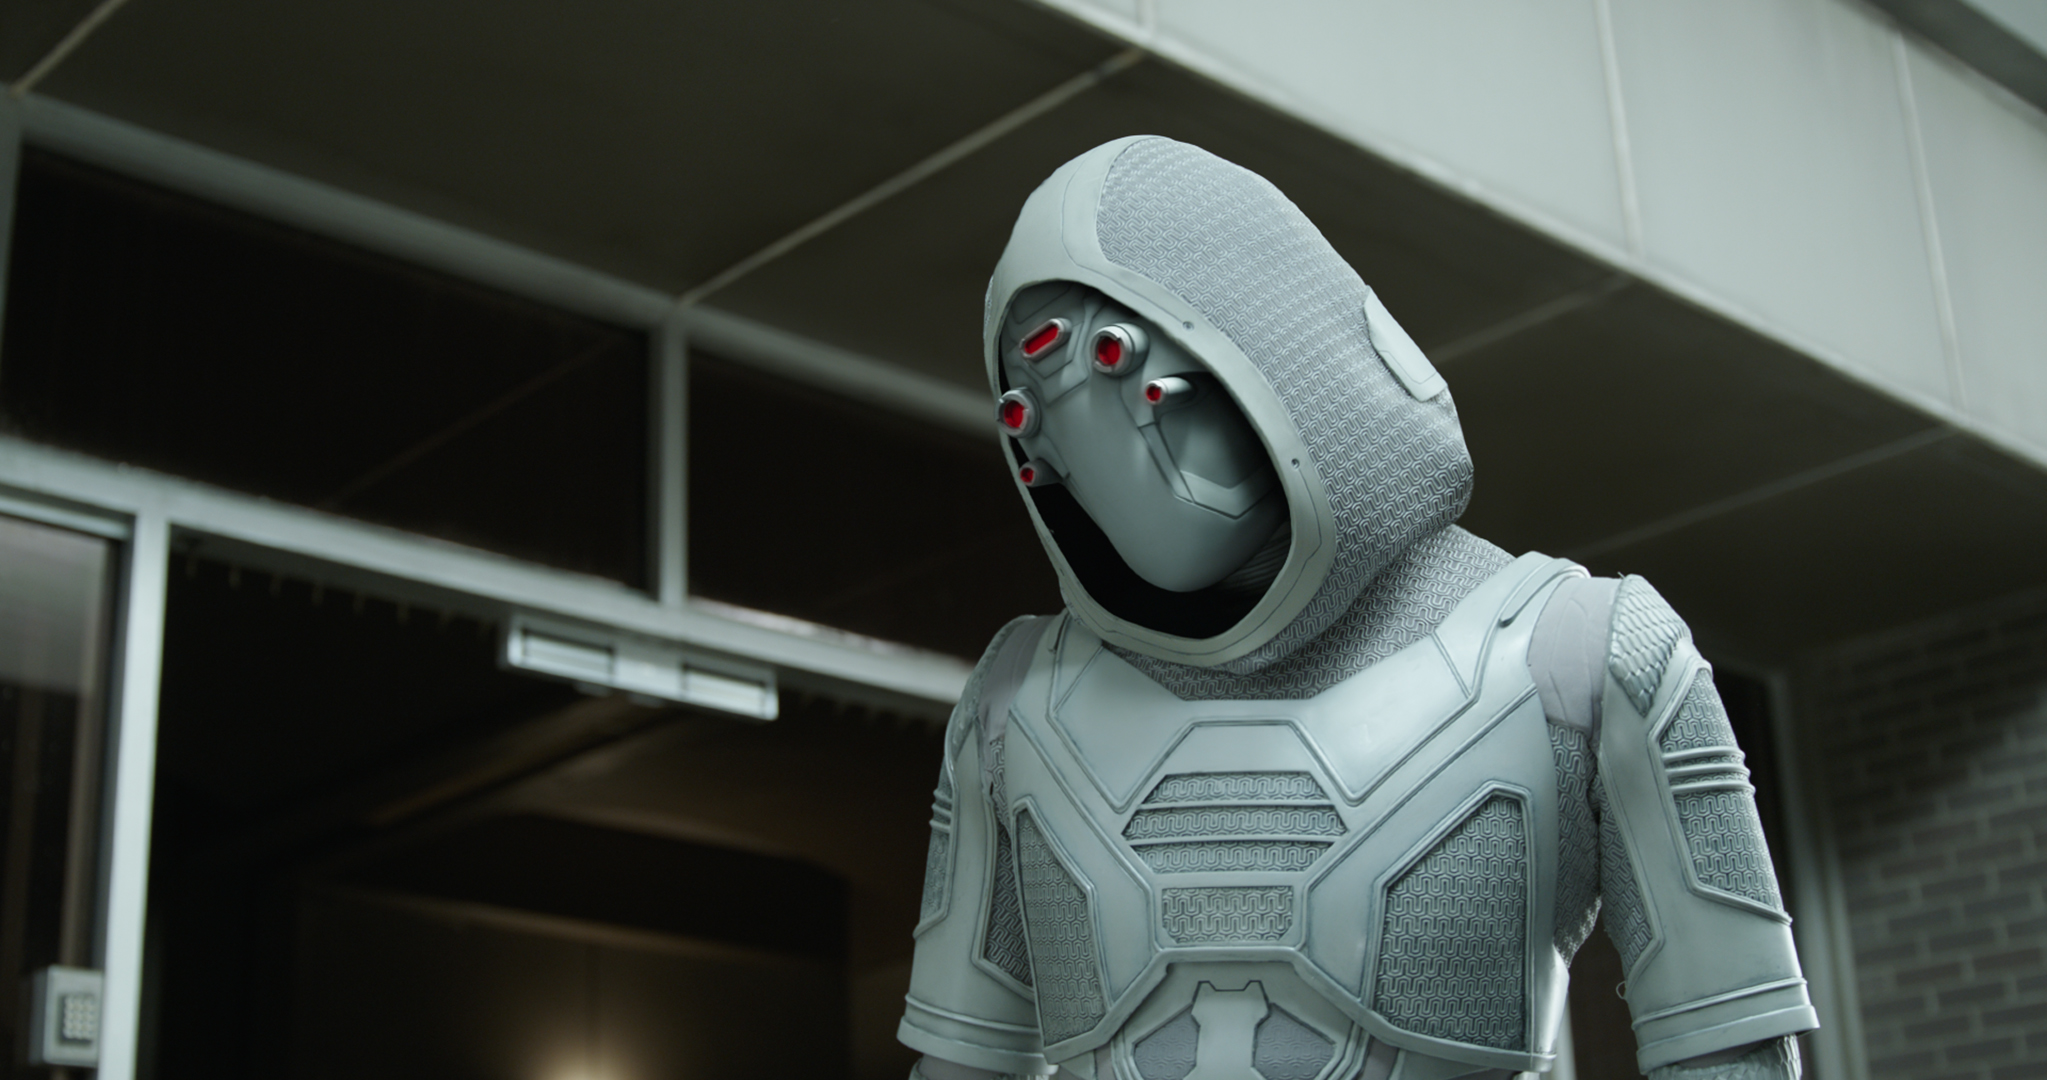 Ghost (Hannah John-Kamen) c <i>Ant-Man and the Wasp</i> (Film Frame/Marvel Studios)” class=”fix-layout-shift”/><br />
                                </source></source></source></picture>
</figure>
<div class=